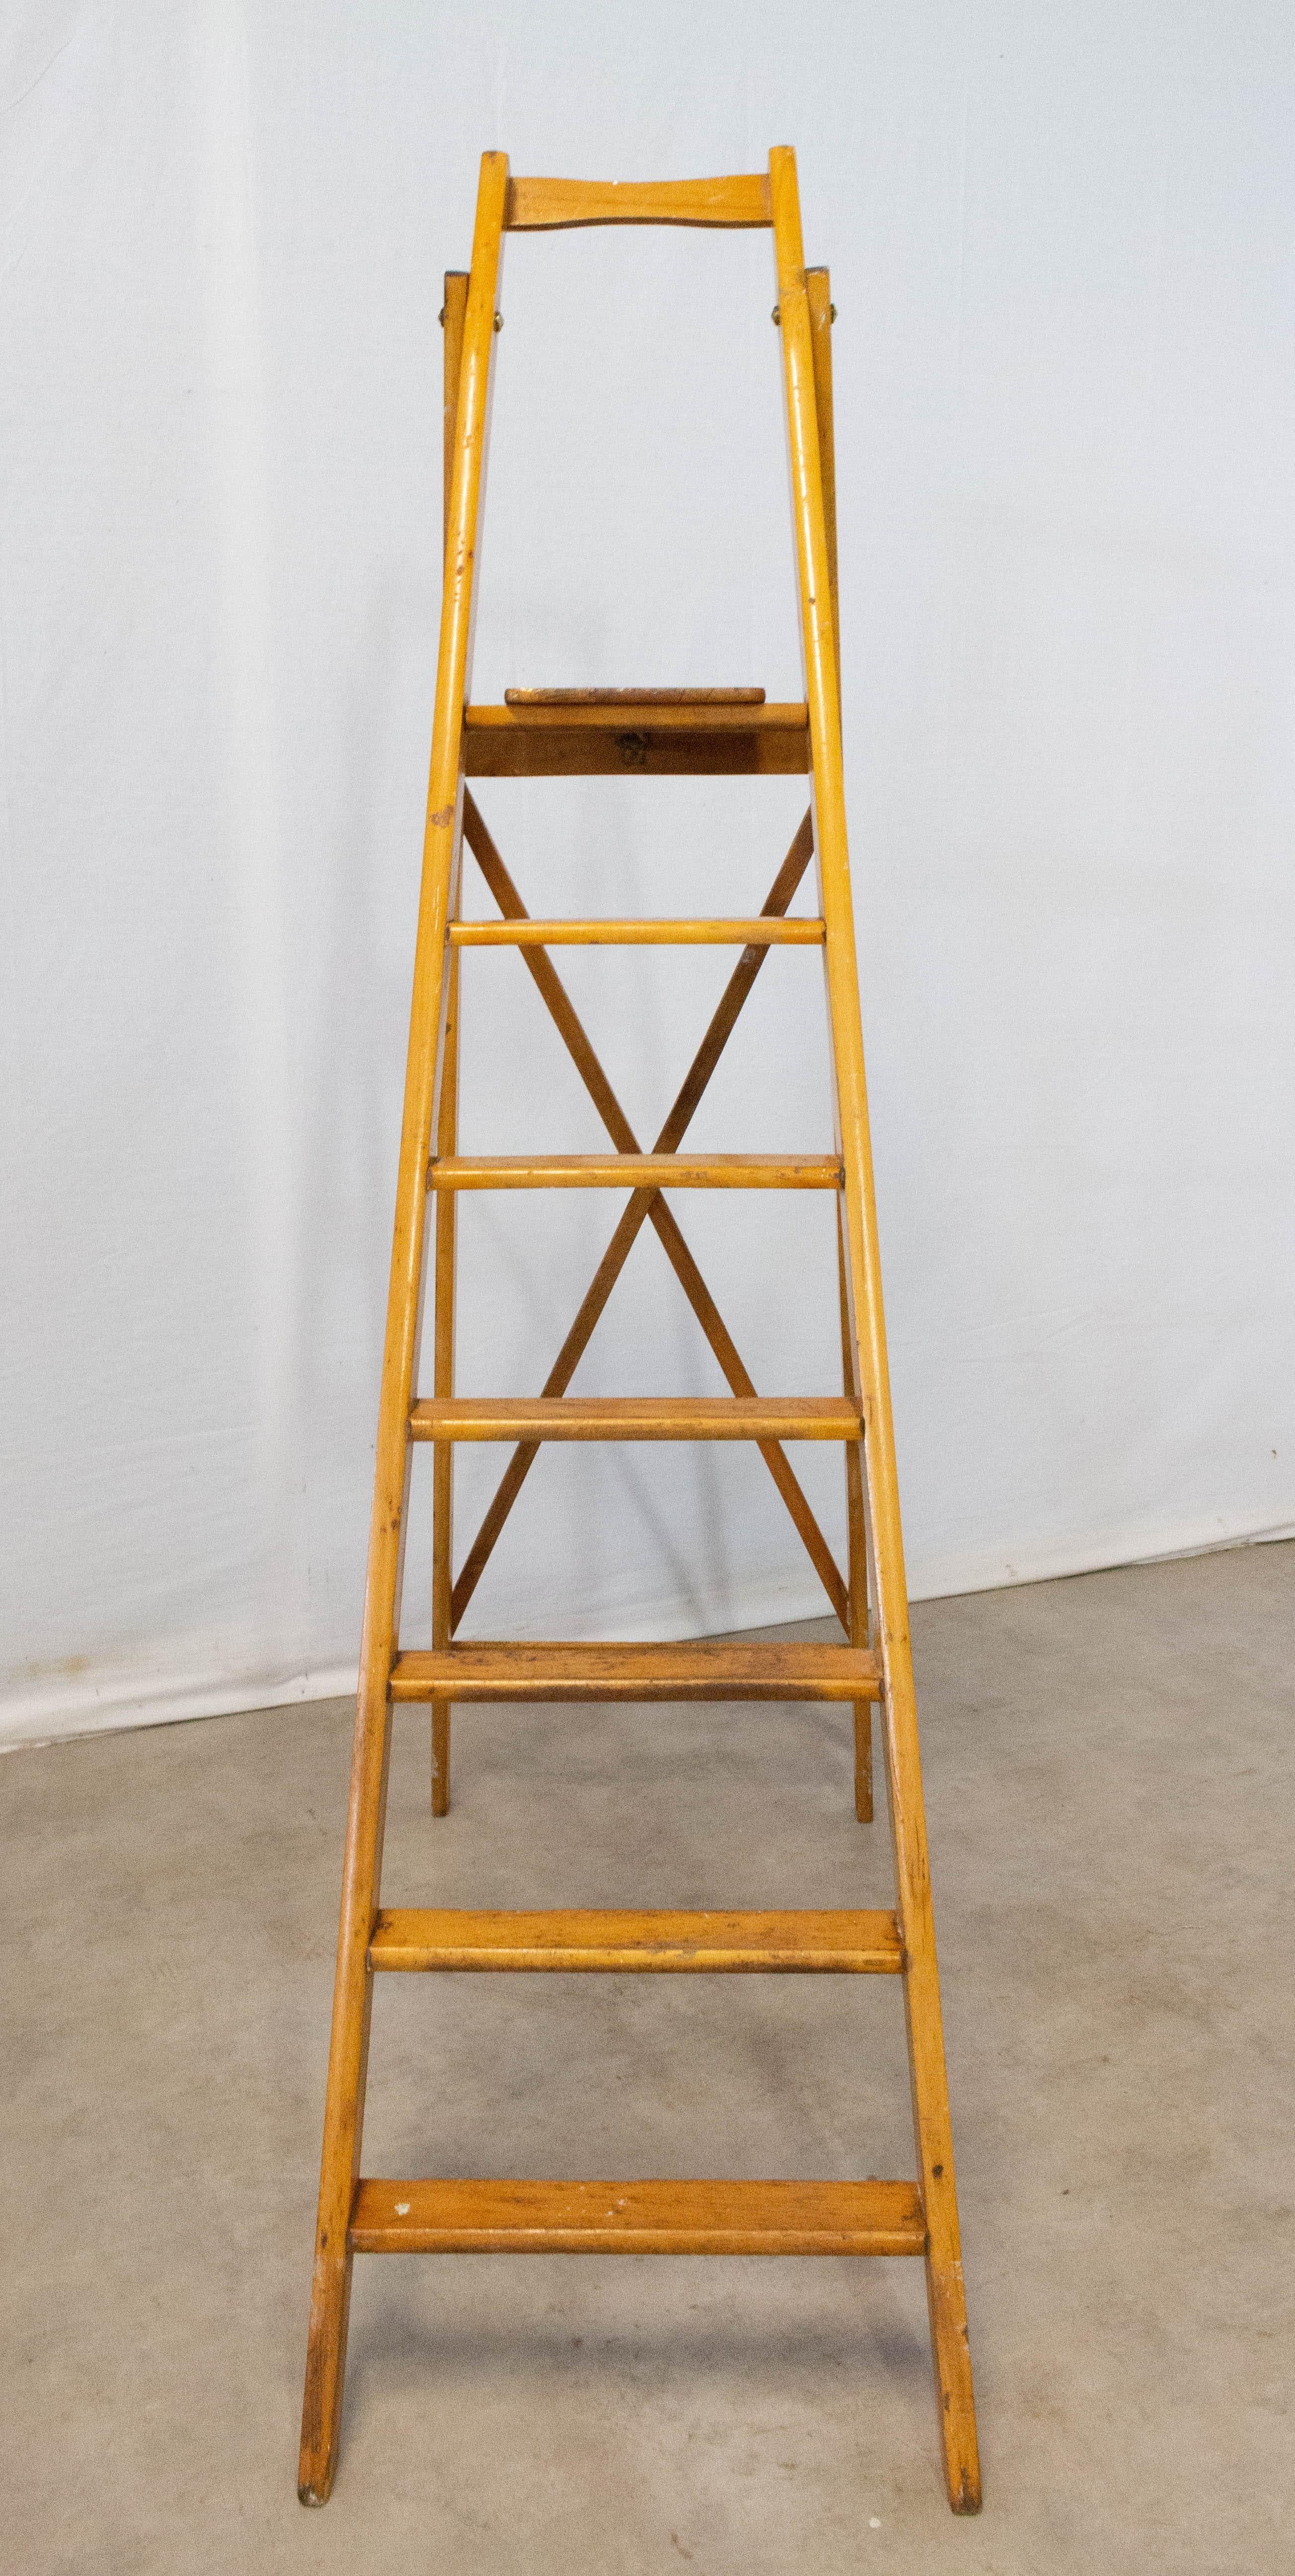 Midcentury workshop ladder or library steps, French.
Meubles de Metier 
Dimensions when folded 54 x 189 x 8 cm
Very good vintage condition.

For shipping: 54 x 189 x 8 cm 11 kg